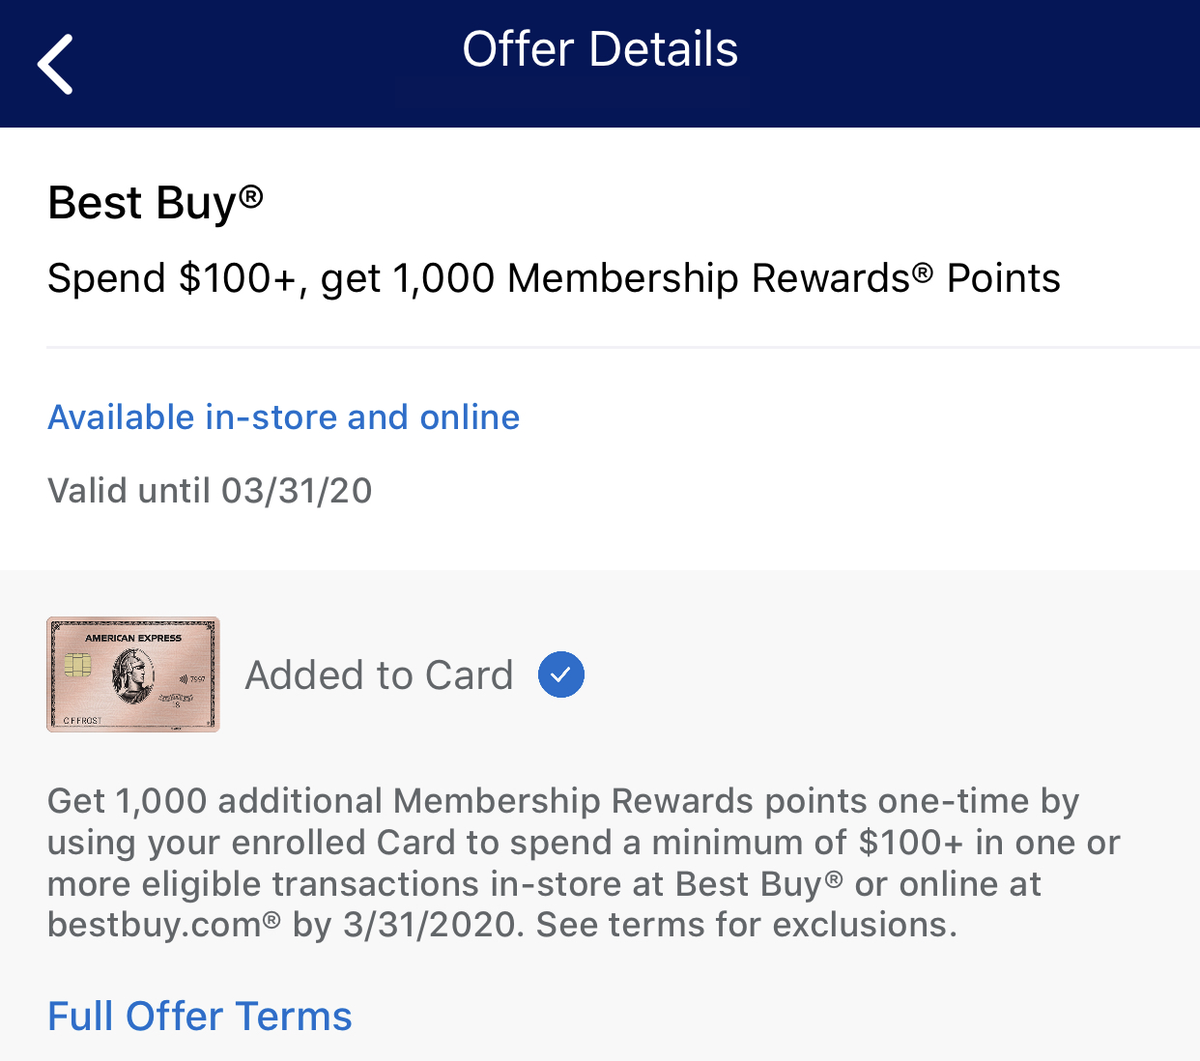 Amex offer for best buy